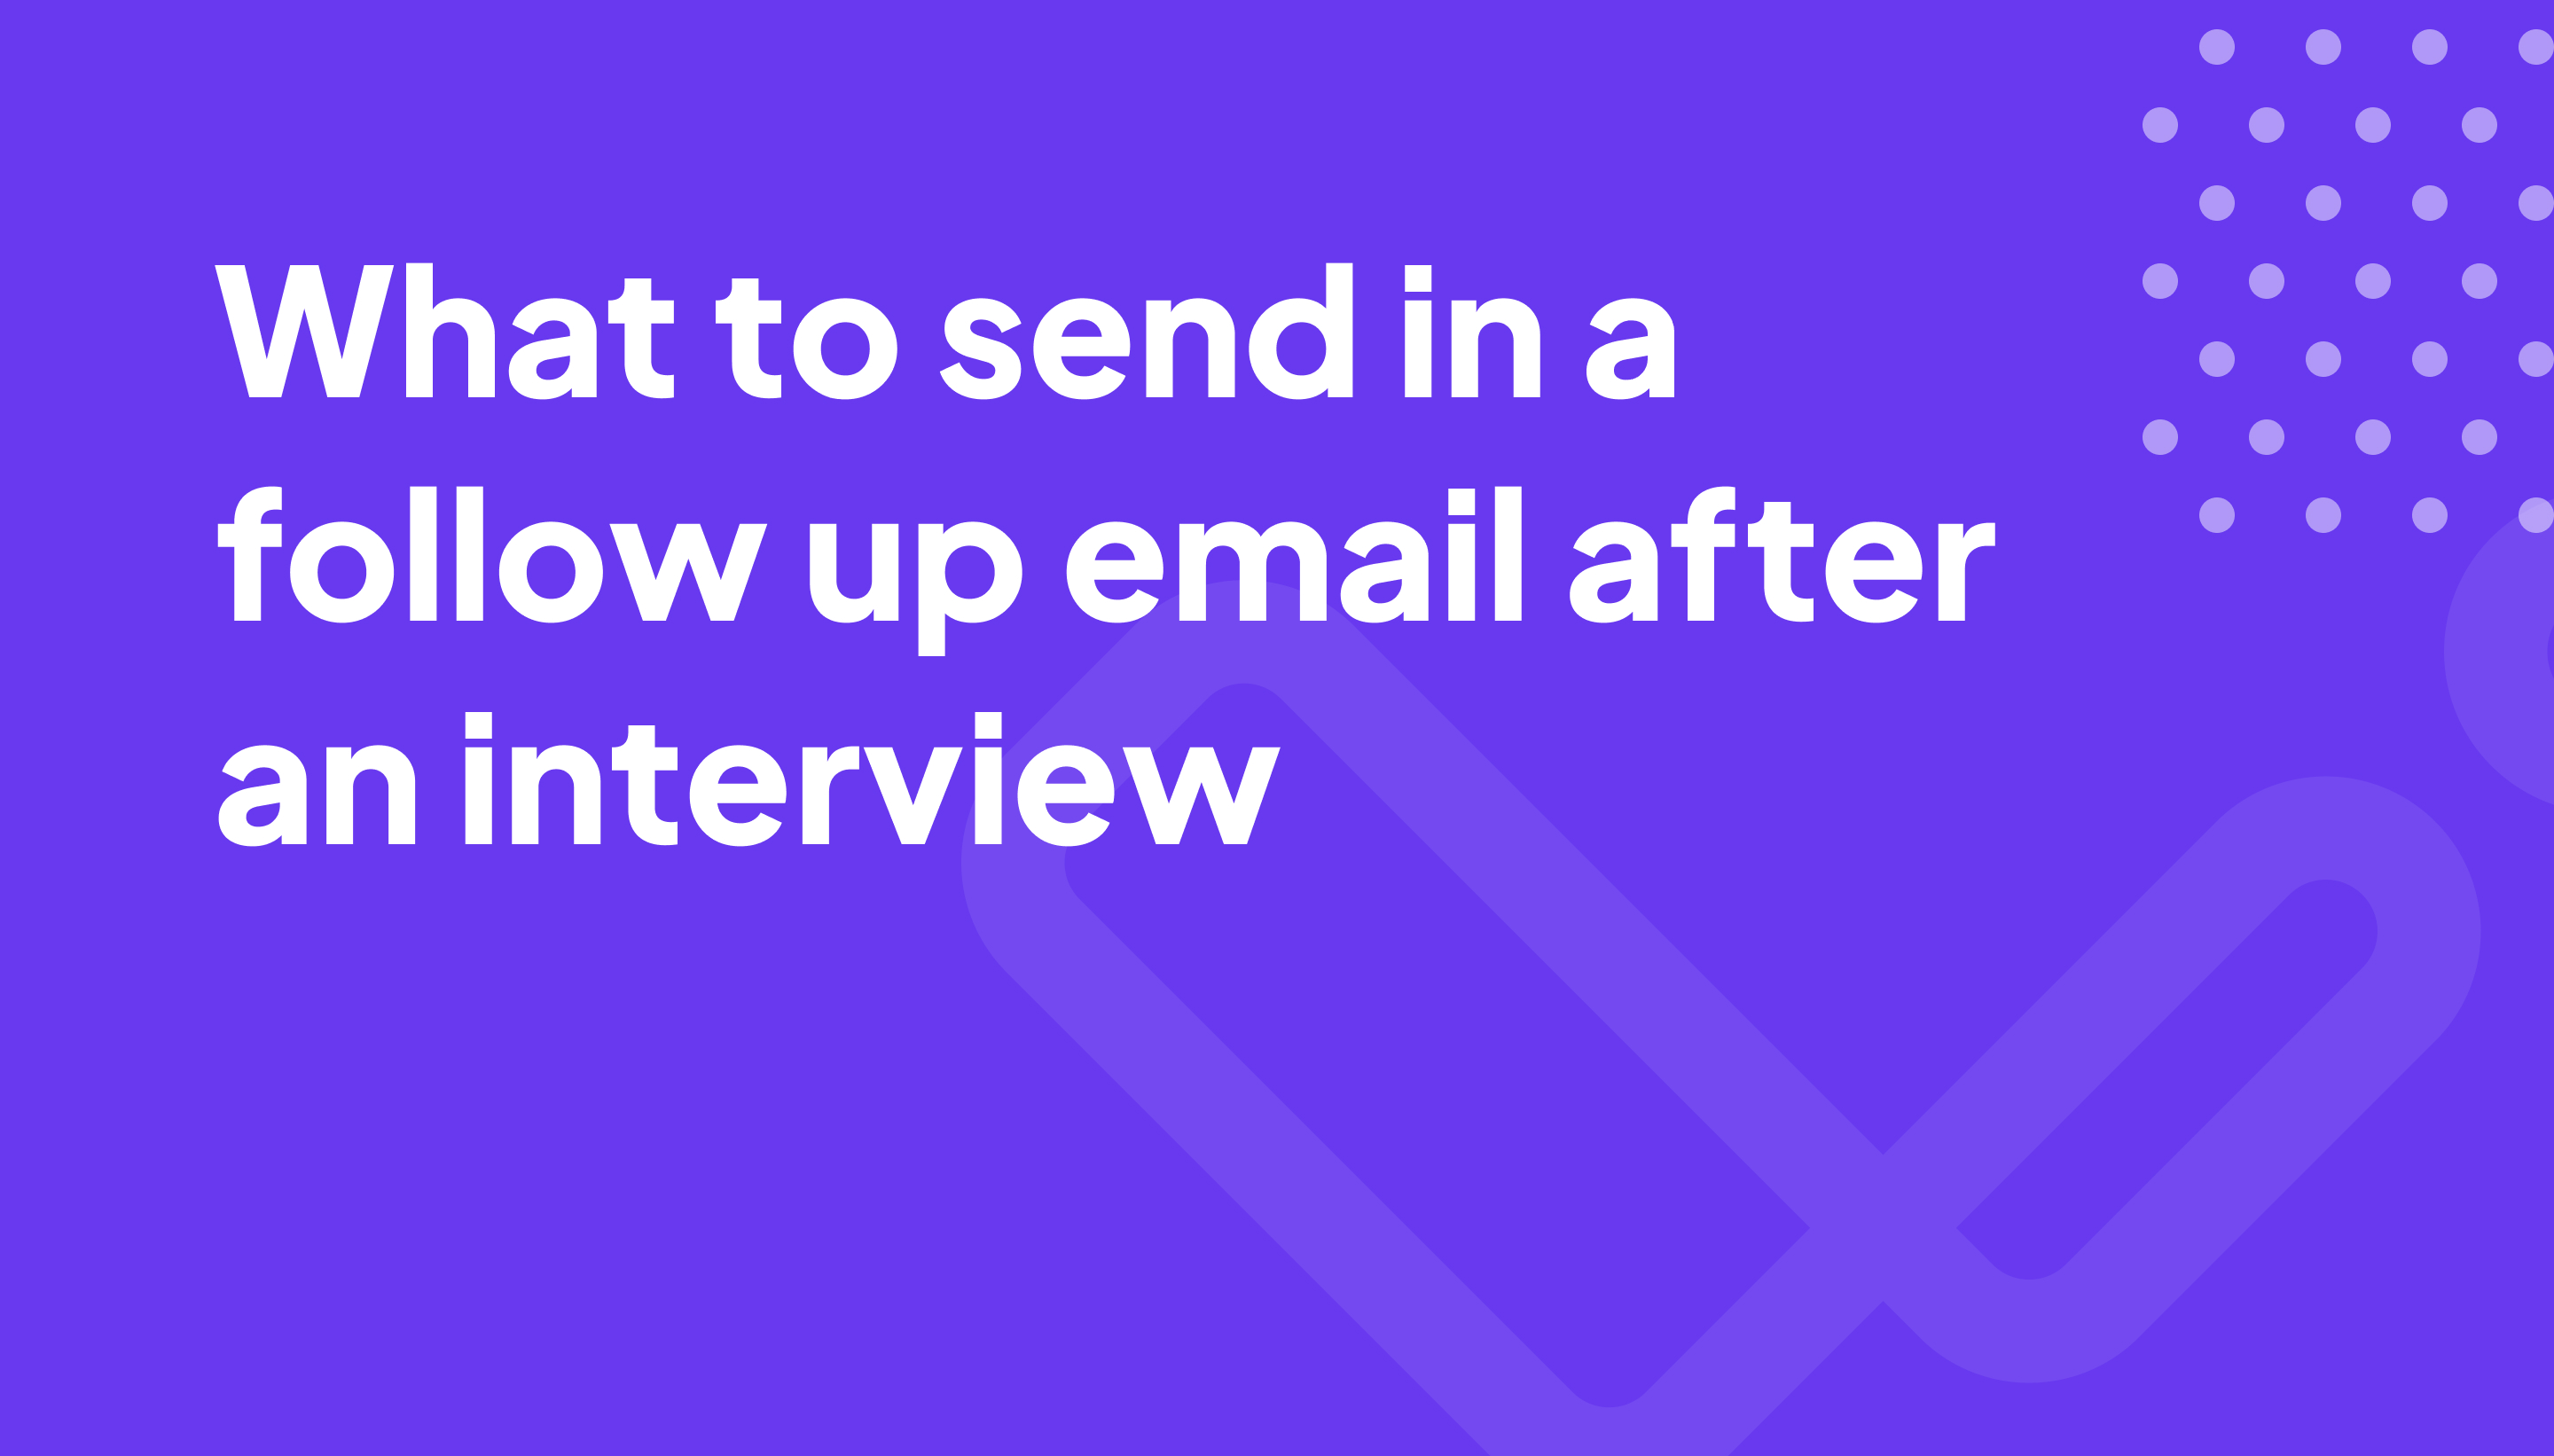 What to send in a follow up email after an interview